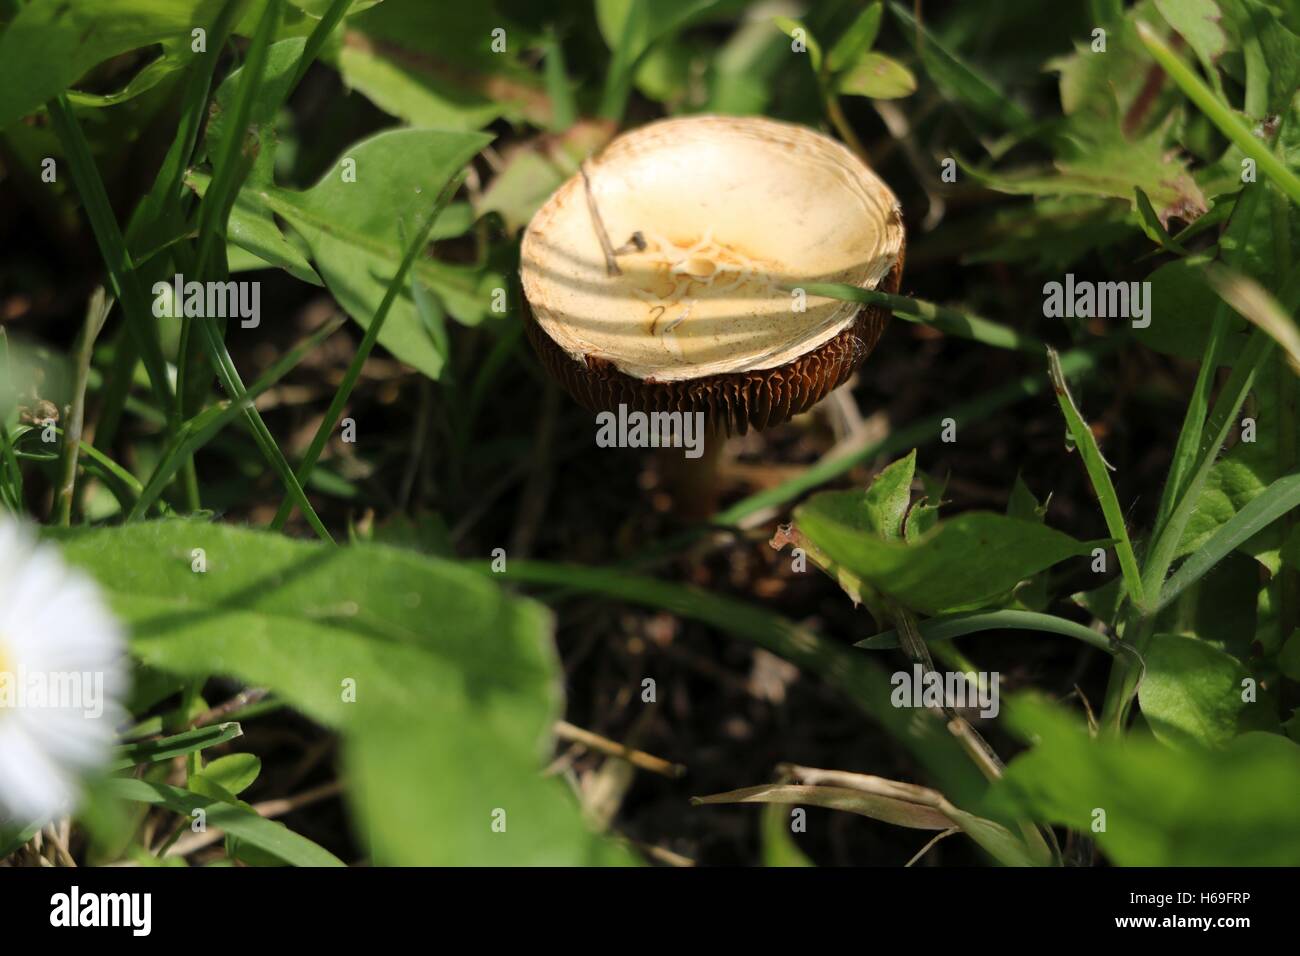 Forest mushrooms in the grass Stock Photo